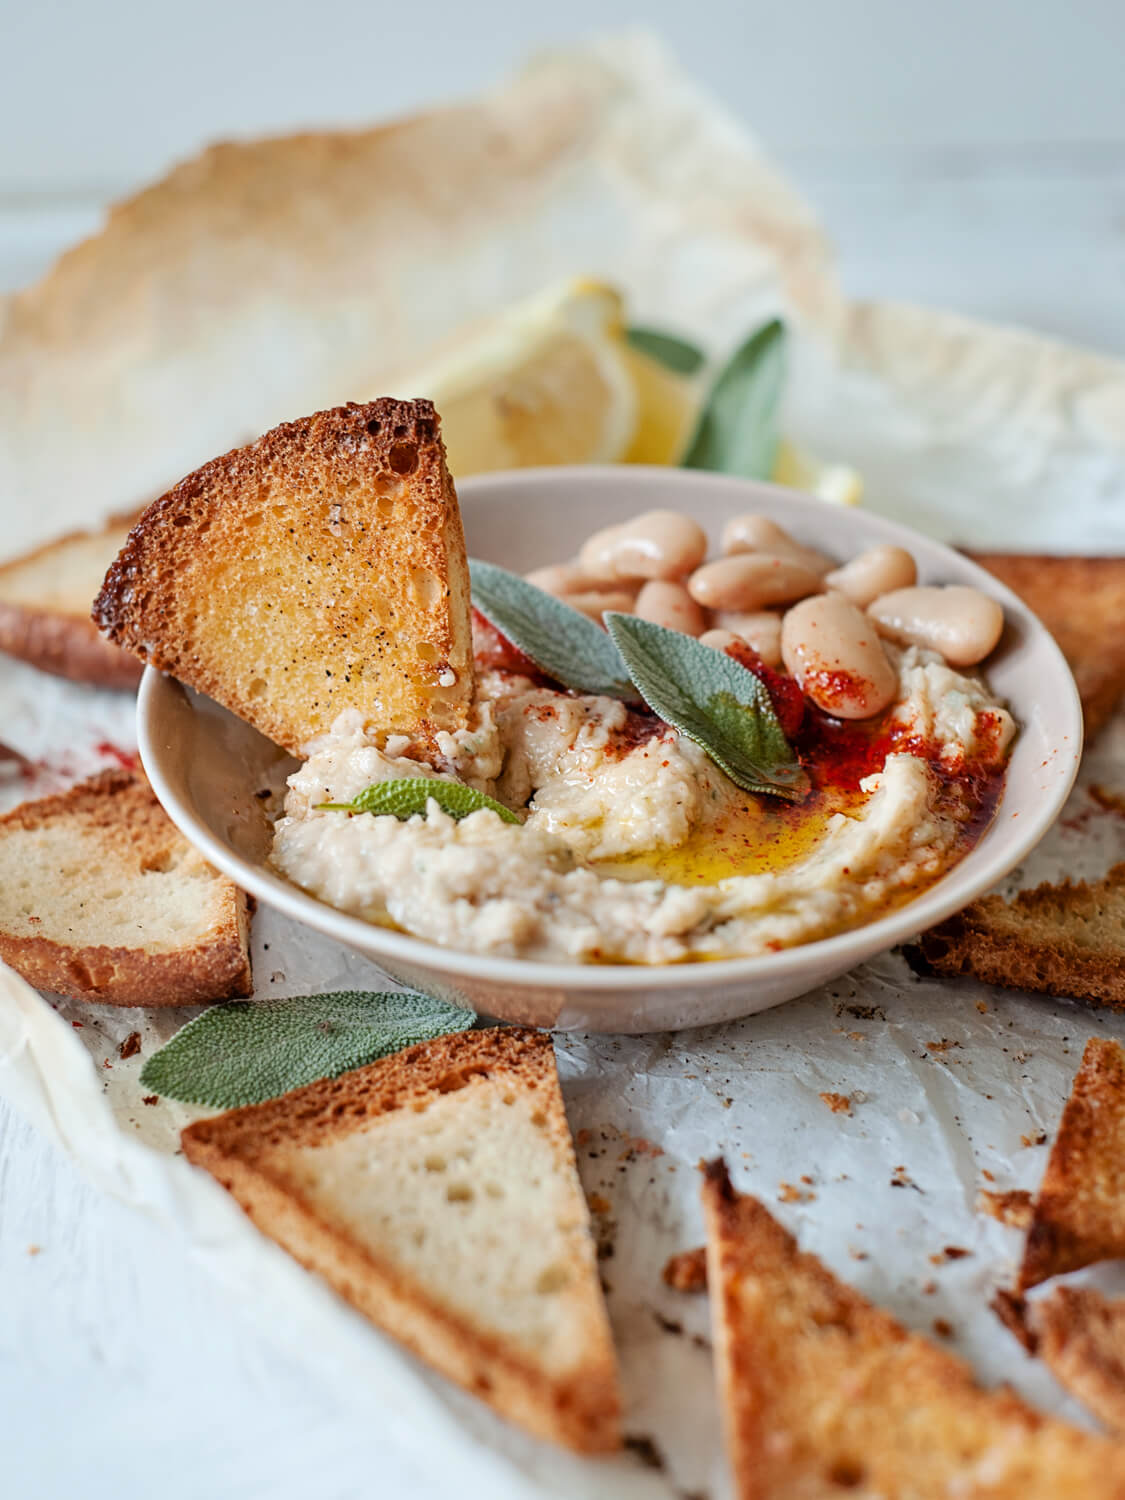 Delicious Homemade White Bean Dip surrounded with Pita Chips